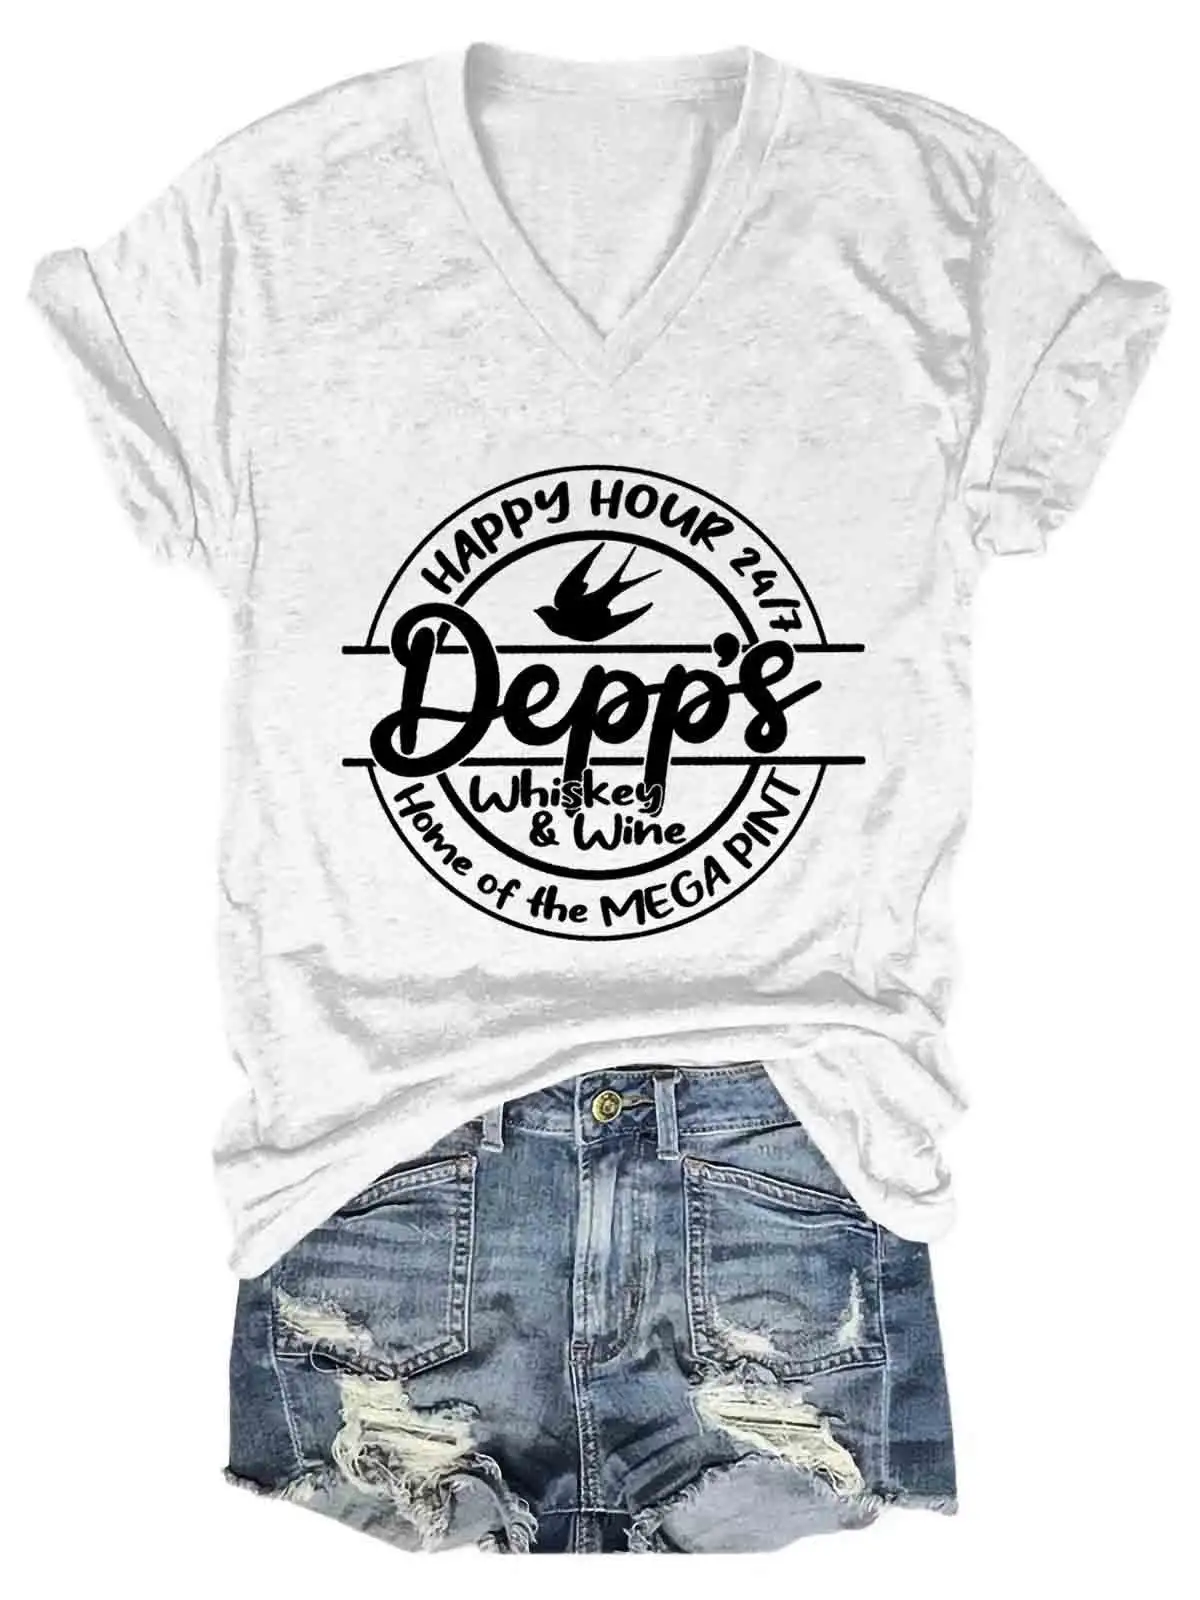 Women's Happy House 24 7 Depps Whiskey And Wine Home Of The Mega Pint V-Neck T-Shirt